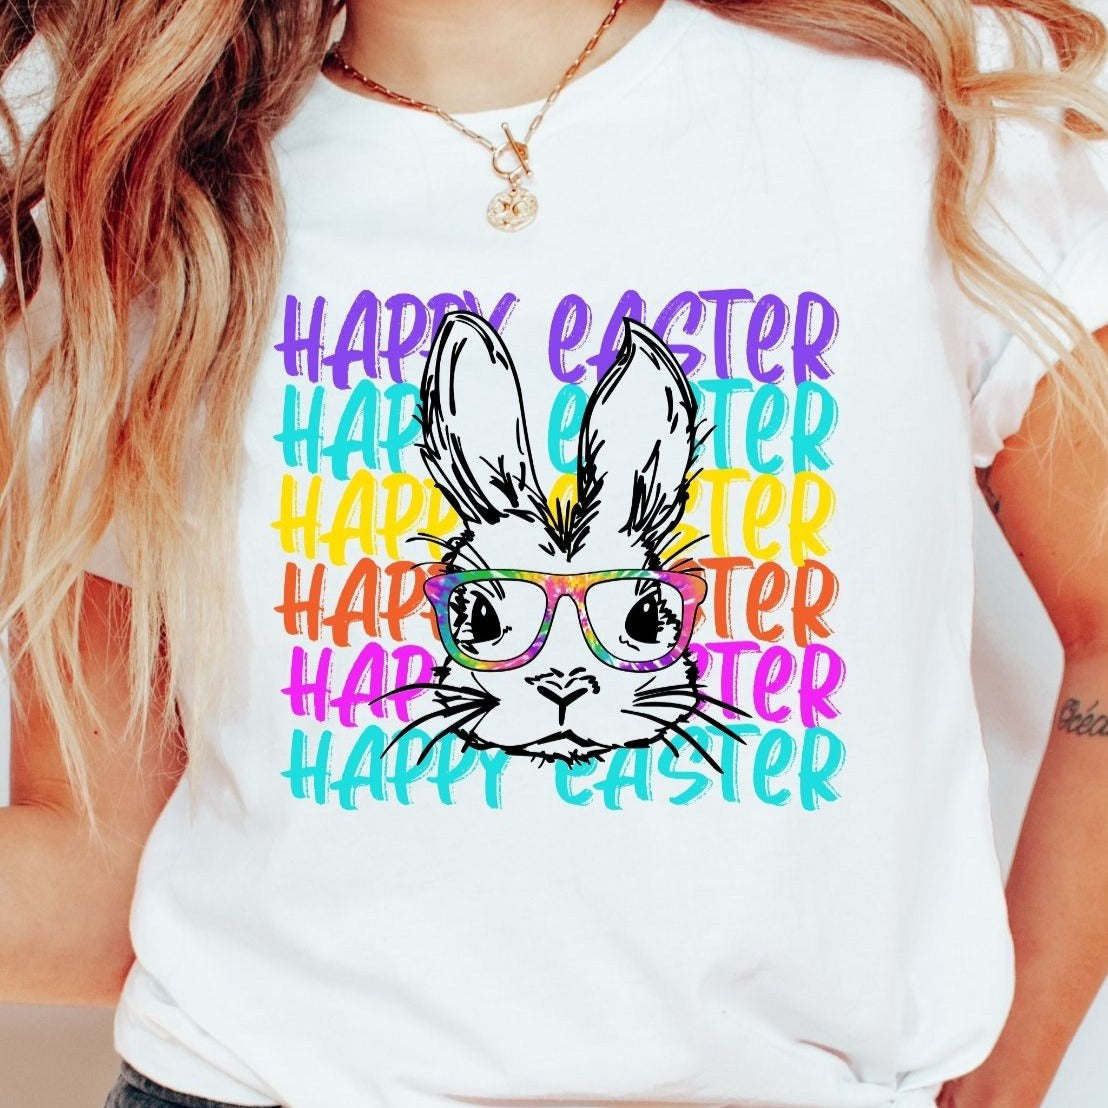 HAPPY EASTER SHIRT